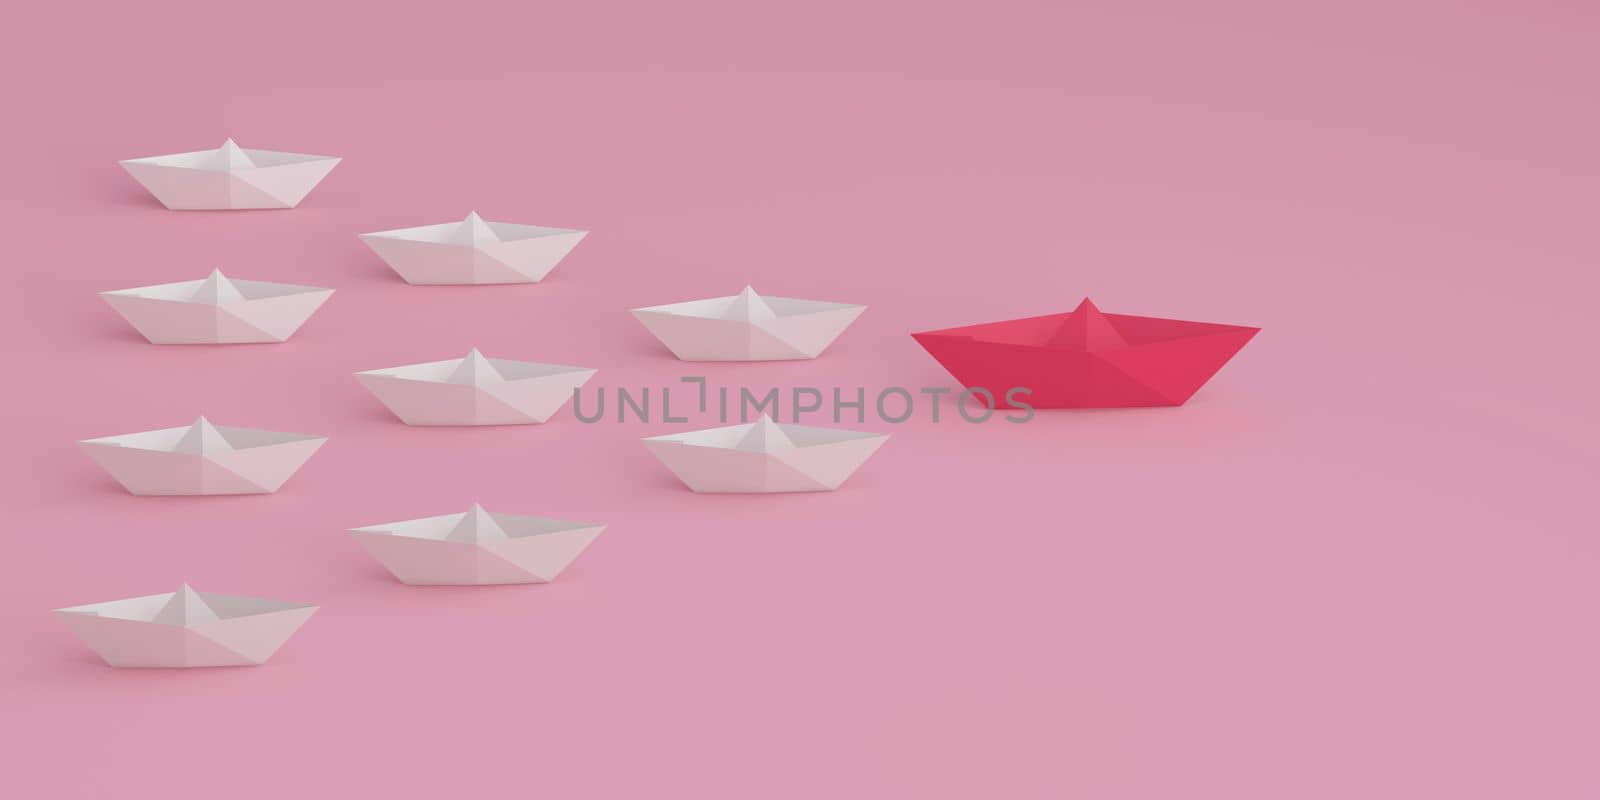 Top view of Paper boat leads pink followed by other white boat on a pink background. Social media or internet followers concept. 3D rendering.